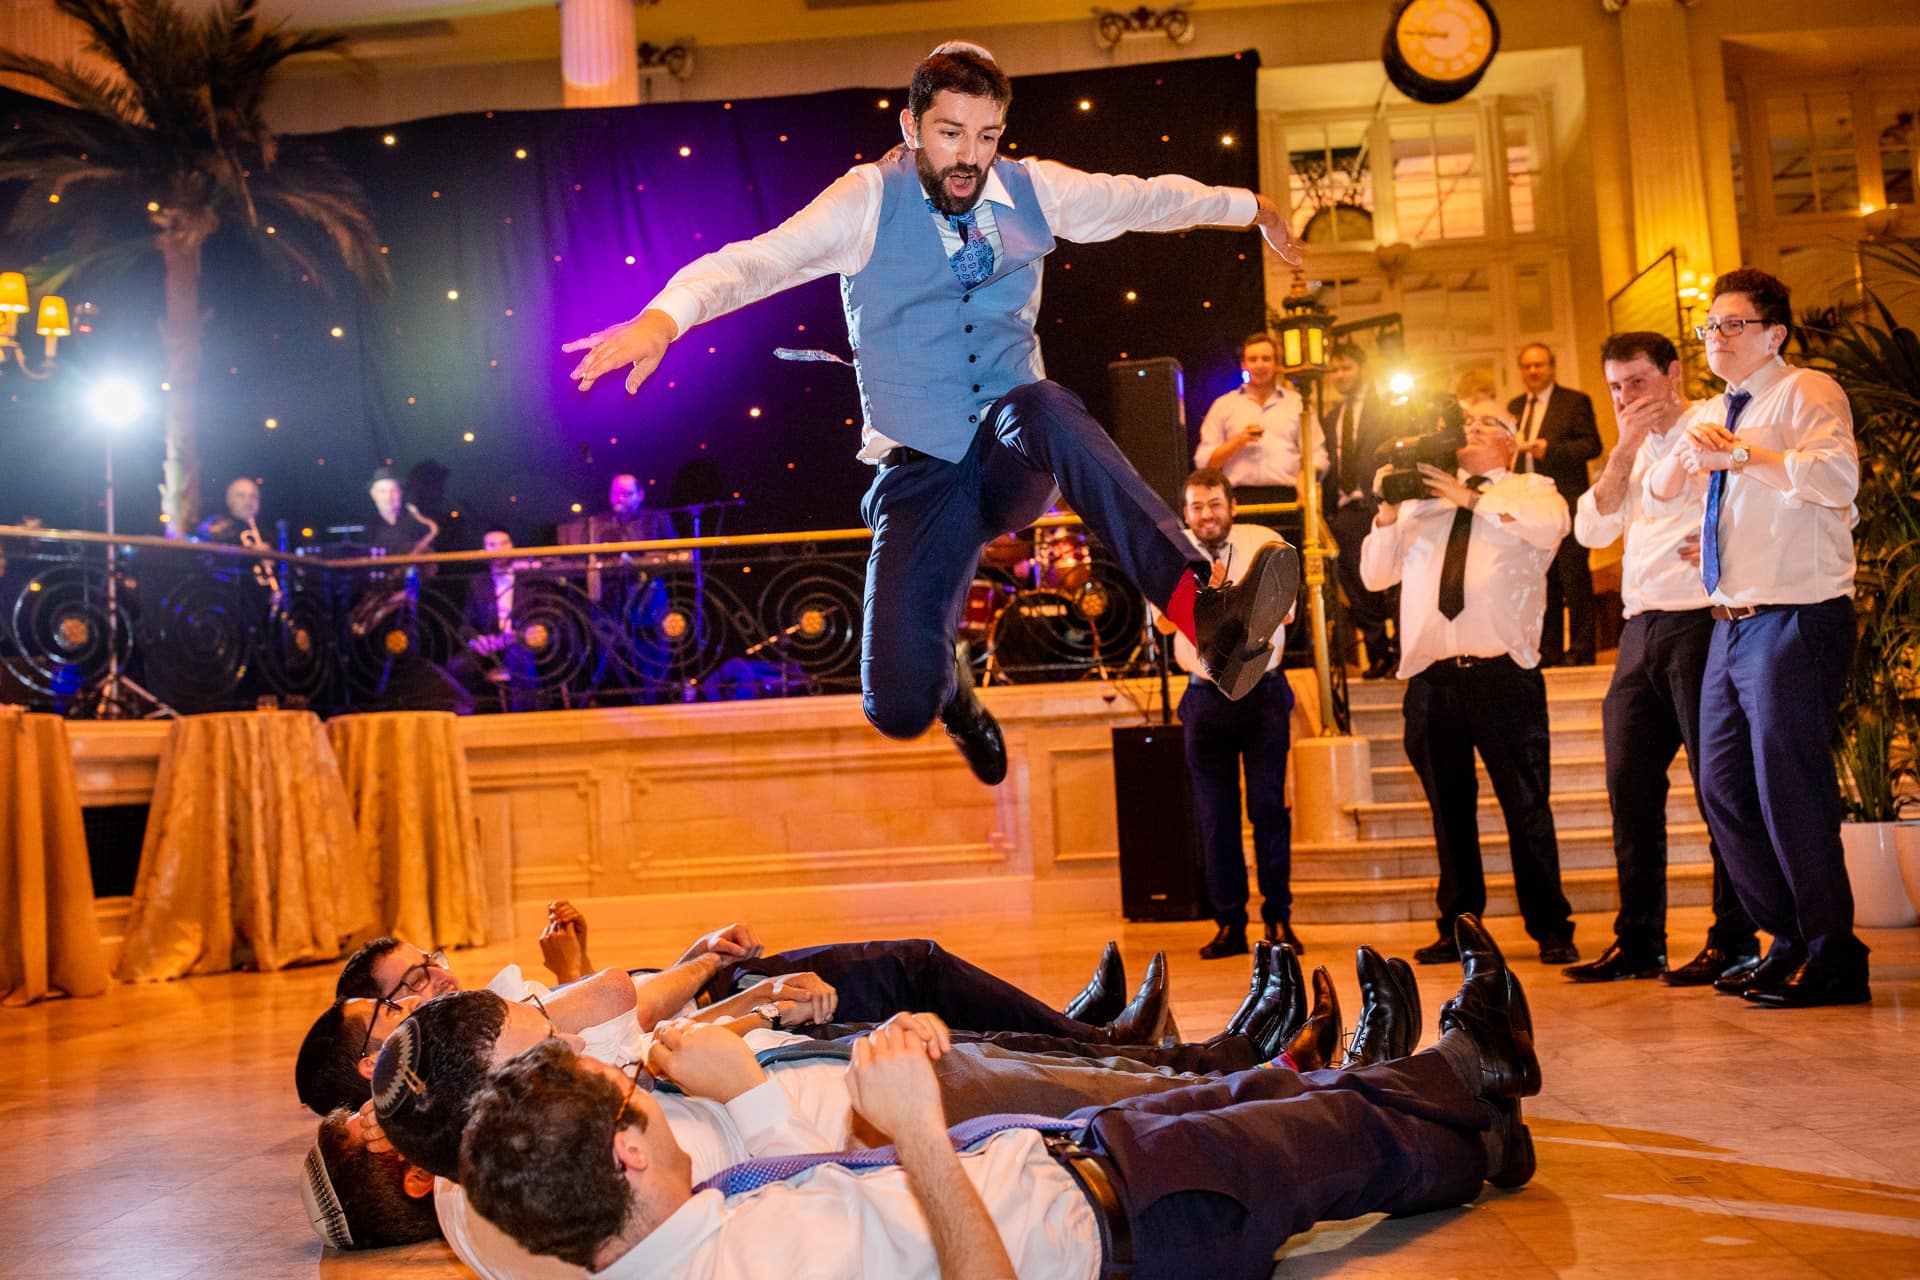 groom jumping over his friends